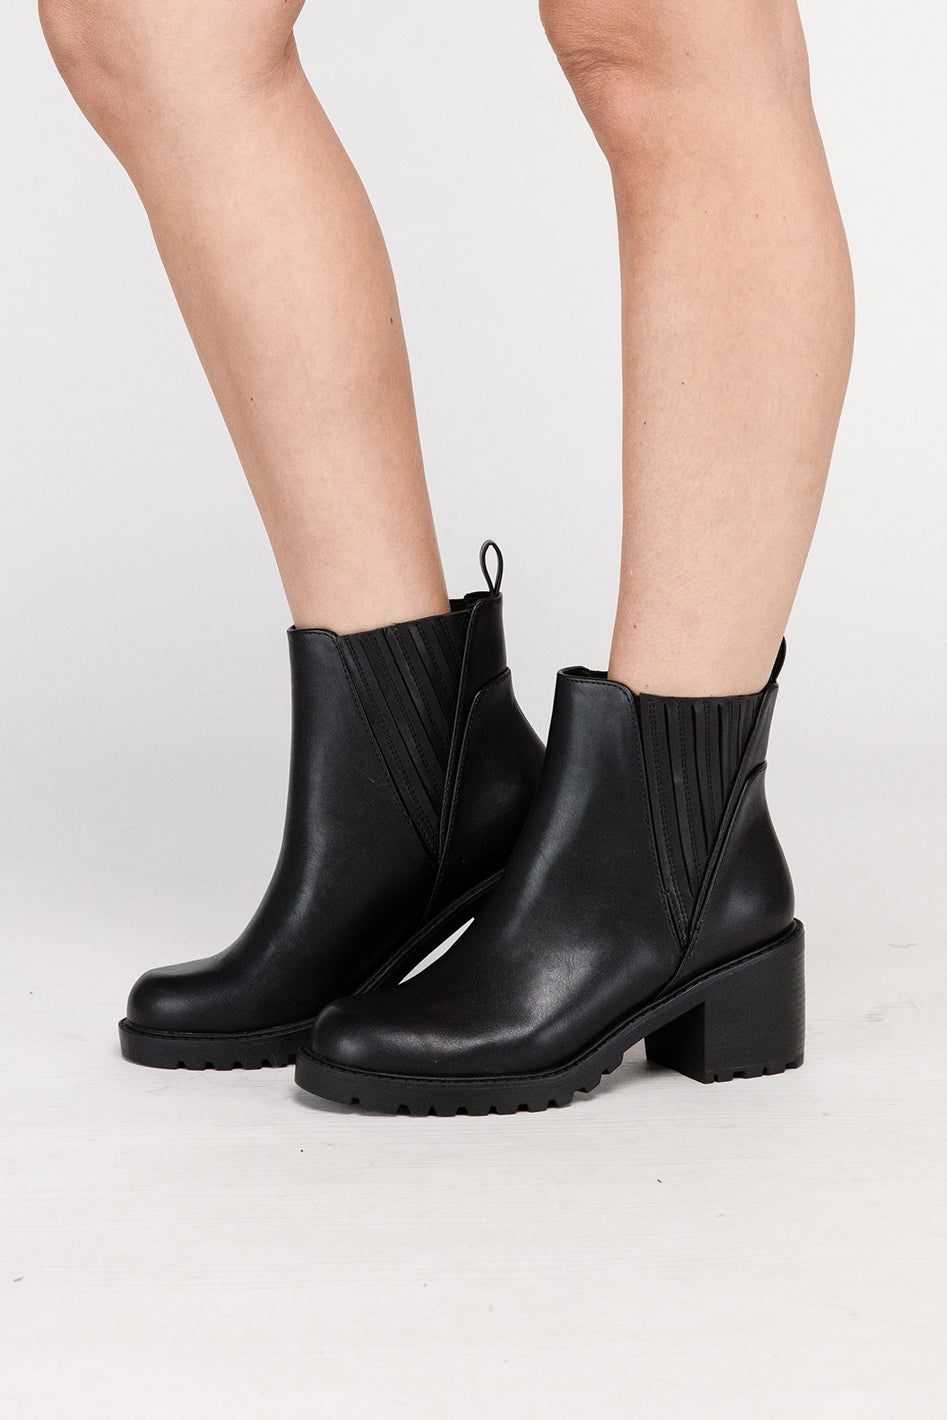 WISELY Ankle Bootie - Azoroh